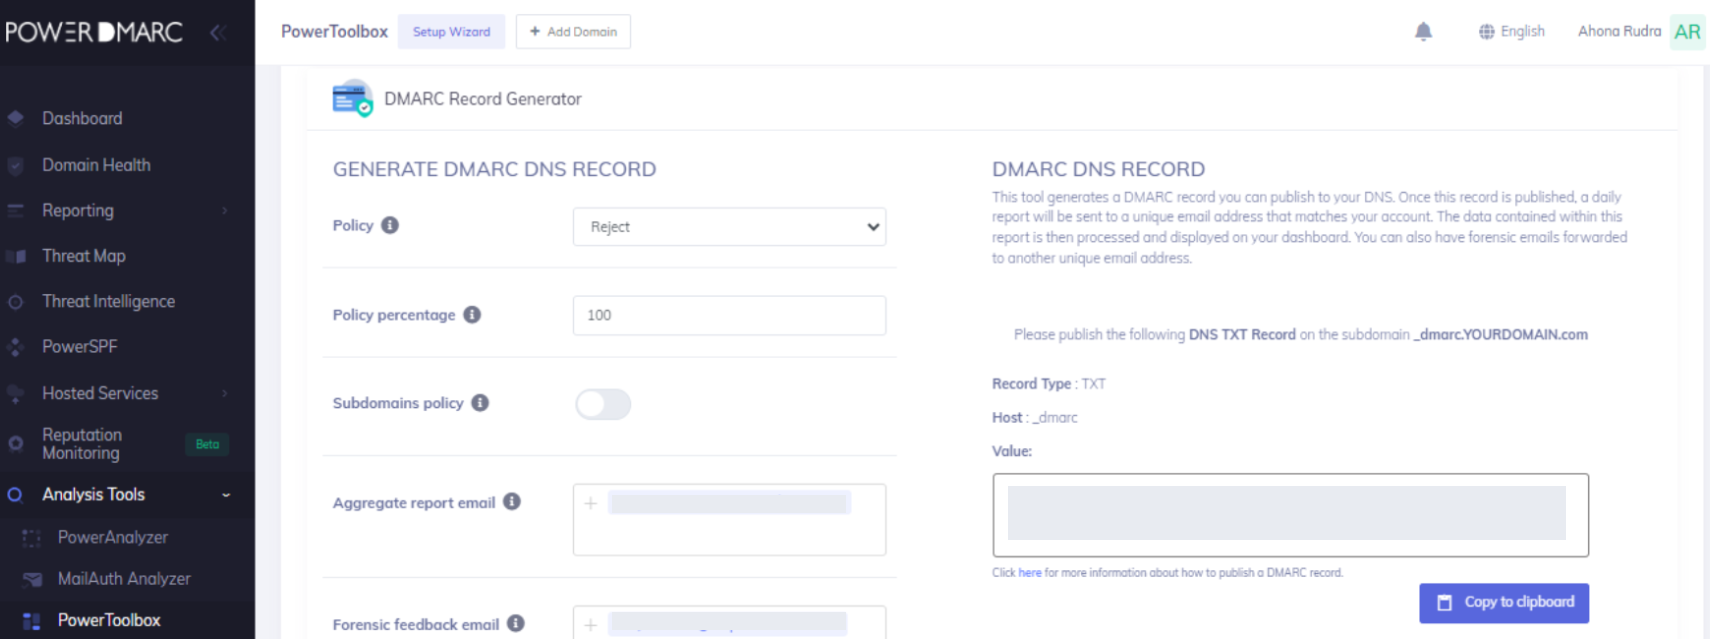 Create-your-TXT-record-for-Shopify-DMARC-using-our-DMARC-generator-tool